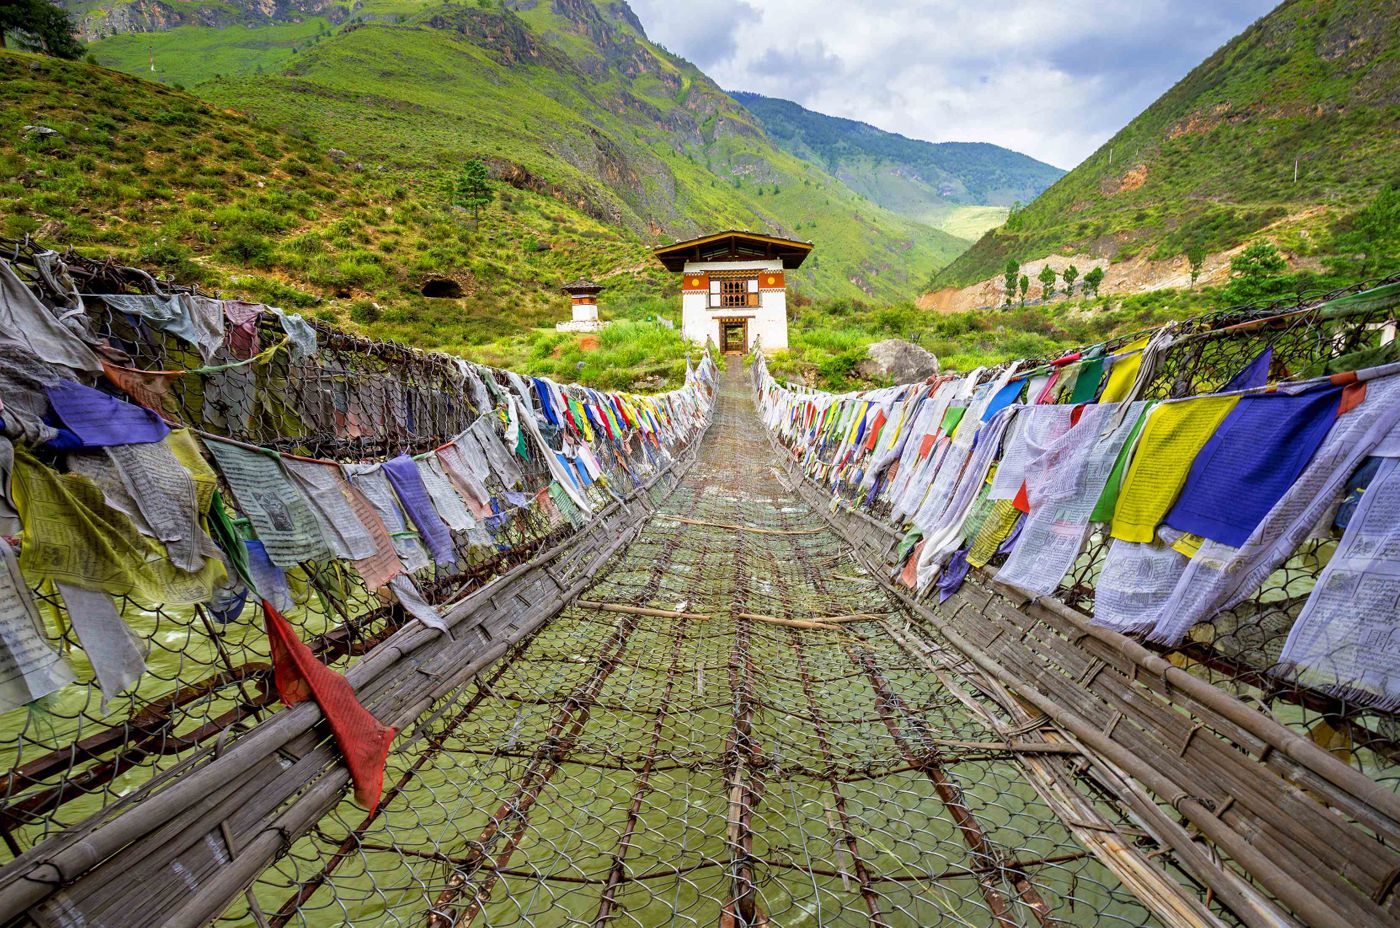 10 Interesting Facts About Bhutan - The Happiest Country In The World